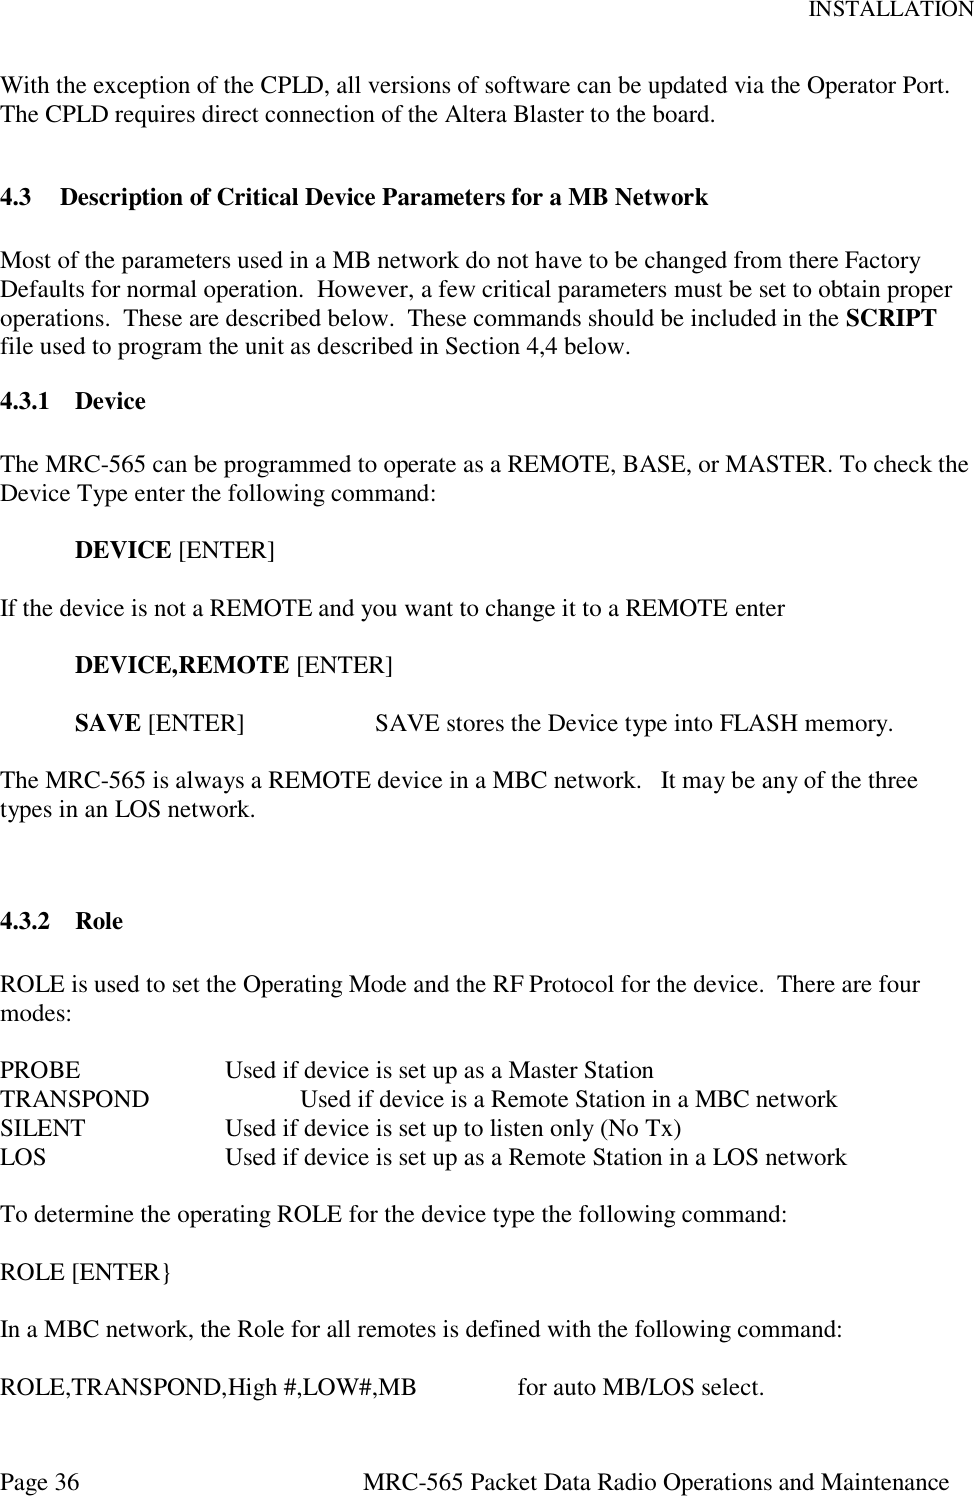 INSTALLATION Page 36  MRC-565 Packet Data Radio Operations and Maintenance With the exception of the CPLD, all versions of software can be updated via the Operator Port.  The CPLD requires direct connection of the Altera Blaster to the board.    4.3 Description of Critical Device Parameters for a MB Network  Most of the parameters used in a MB network do not have to be changed from there Factory Defaults for normal operation.  However, a few critical parameters must be set to obtain proper operations.  These are described below.  These commands should be included in the SCRIPT file used to program the unit as described in Section 4,4 below. 4.3.1 Device   The MRC-565 can be programmed to operate as a REMOTE, BASE, or MASTER. To check the Device Type enter the following command:   DEVICE [ENTER]  If the device is not a REMOTE and you want to change it to a REMOTE enter  DEVICE,REMOTE [ENTER]  SAVE [ENTER]    SAVE stores the Device type into FLASH memory.  The MRC-565 is always a REMOTE device in a MBC network.   It may be any of the three types in an LOS network.   4.3.2 Role  ROLE is used to set the Operating Mode and the RF Protocol for the device.  There are four modes:  PROBE    Used if device is set up as a Master Station TRANSPOND    Used if device is a Remote Station in a MBC network SILENT    Used if device is set up to listen only (No Tx) LOS      Used if device is set up as a Remote Station in a LOS network  To determine the operating ROLE for the device type the following command:  ROLE [ENTER}  In a MBC network, the Role for all remotes is defined with the following command:  ROLE,TRANSPOND,High #,LOW#,MB                for auto MB/LOS select.   